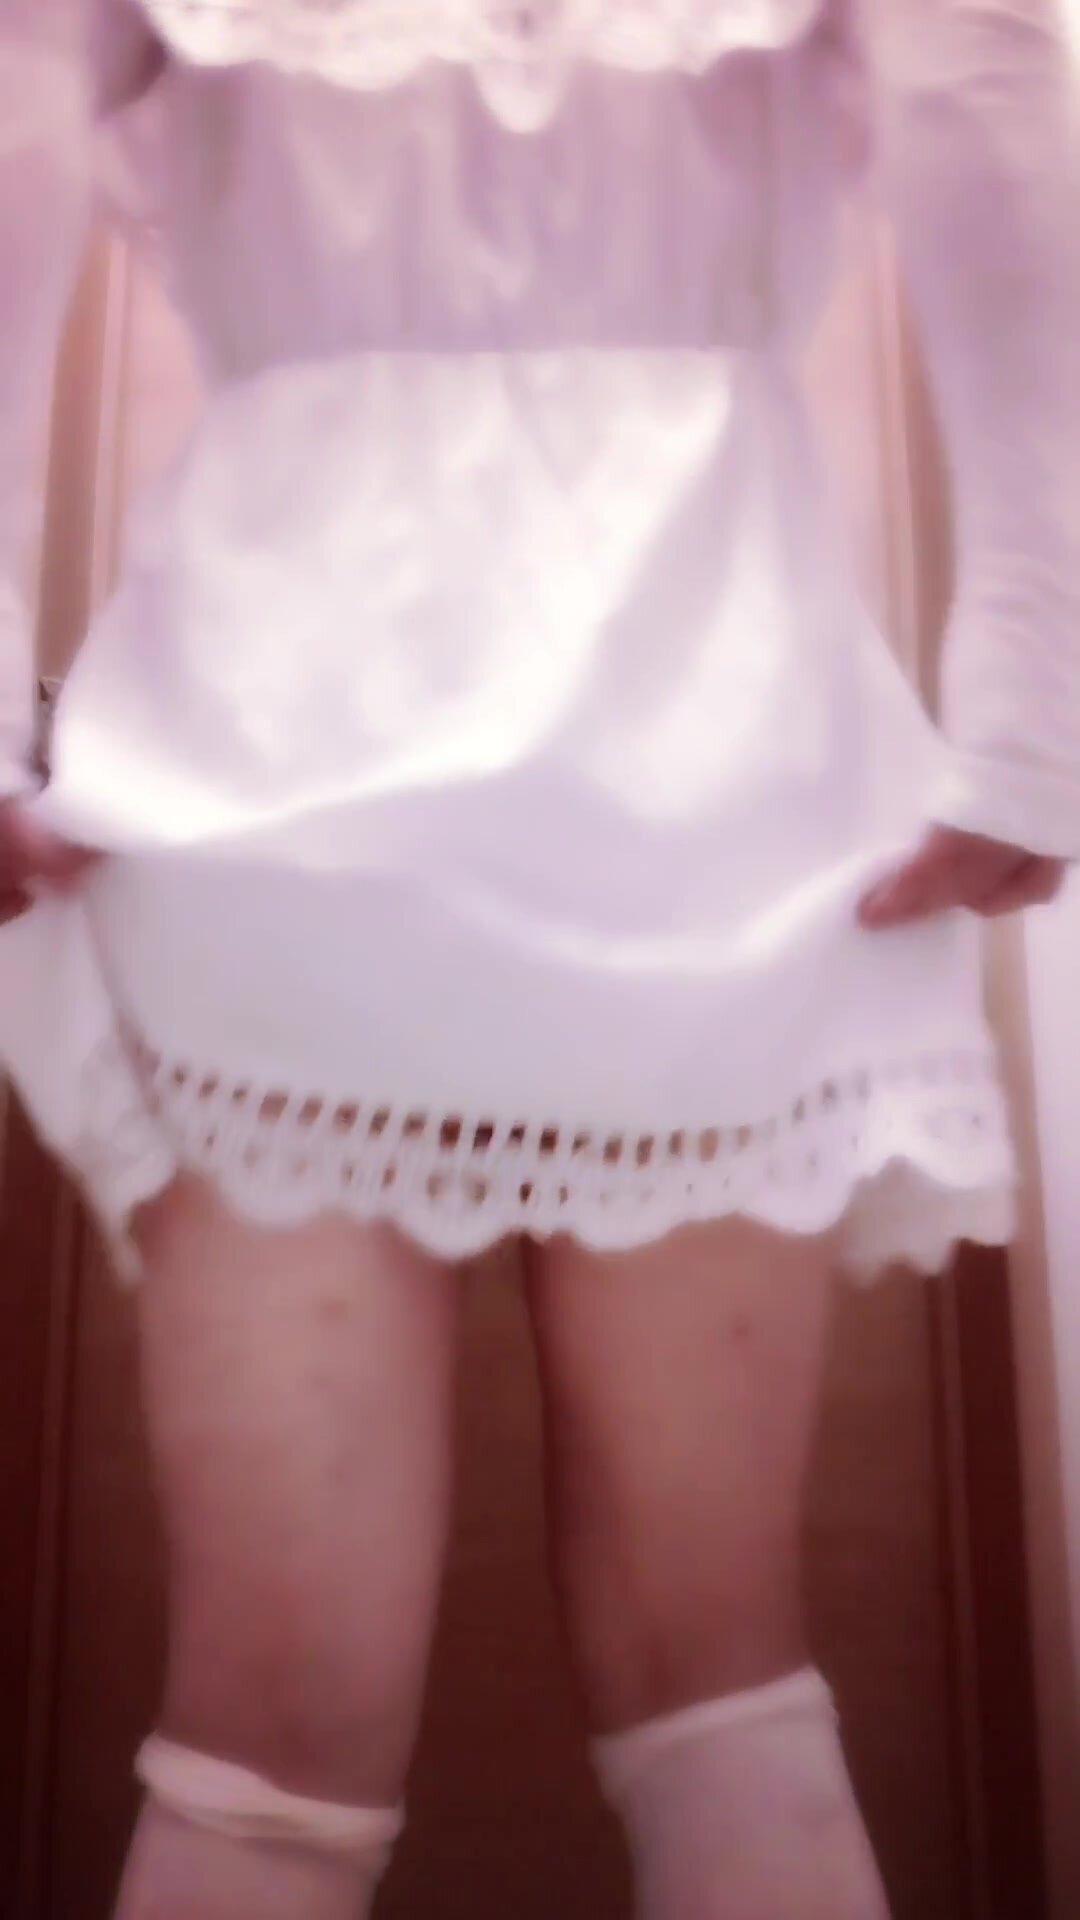 Japanese CD scat in a white dress